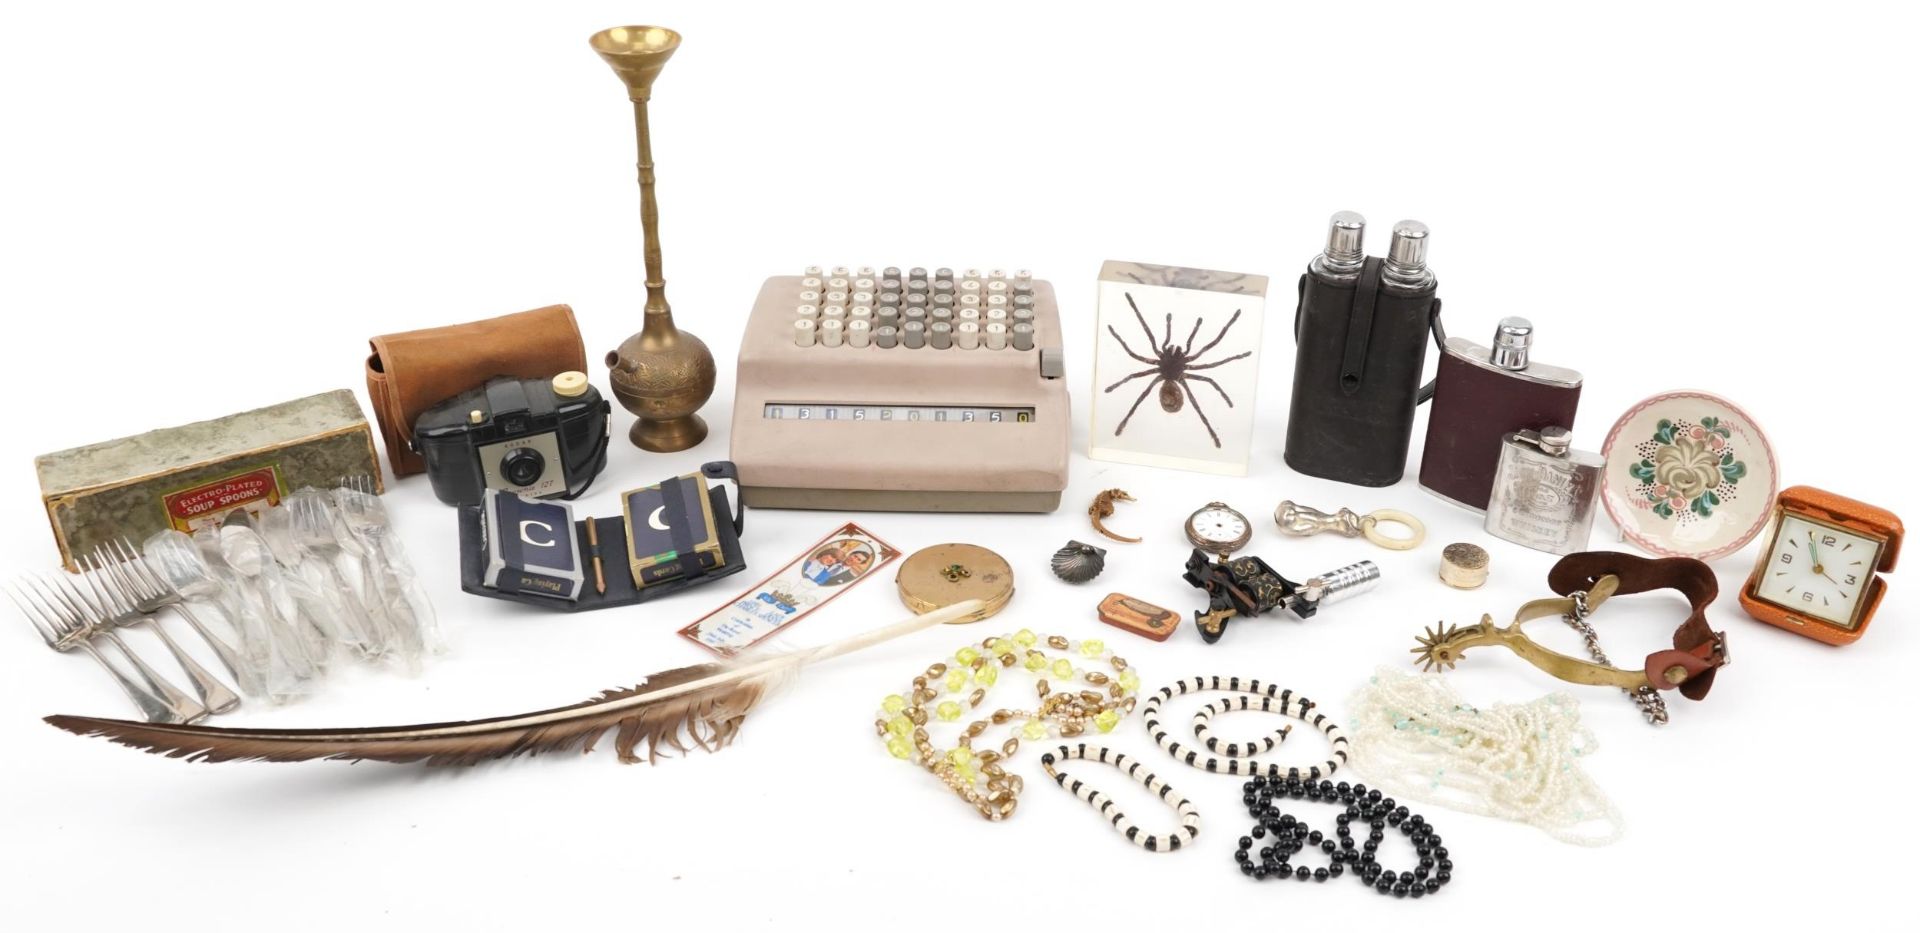 Sundry items including a vintage Plus calculator, hip flasks, costume jewellery, pocket watch and